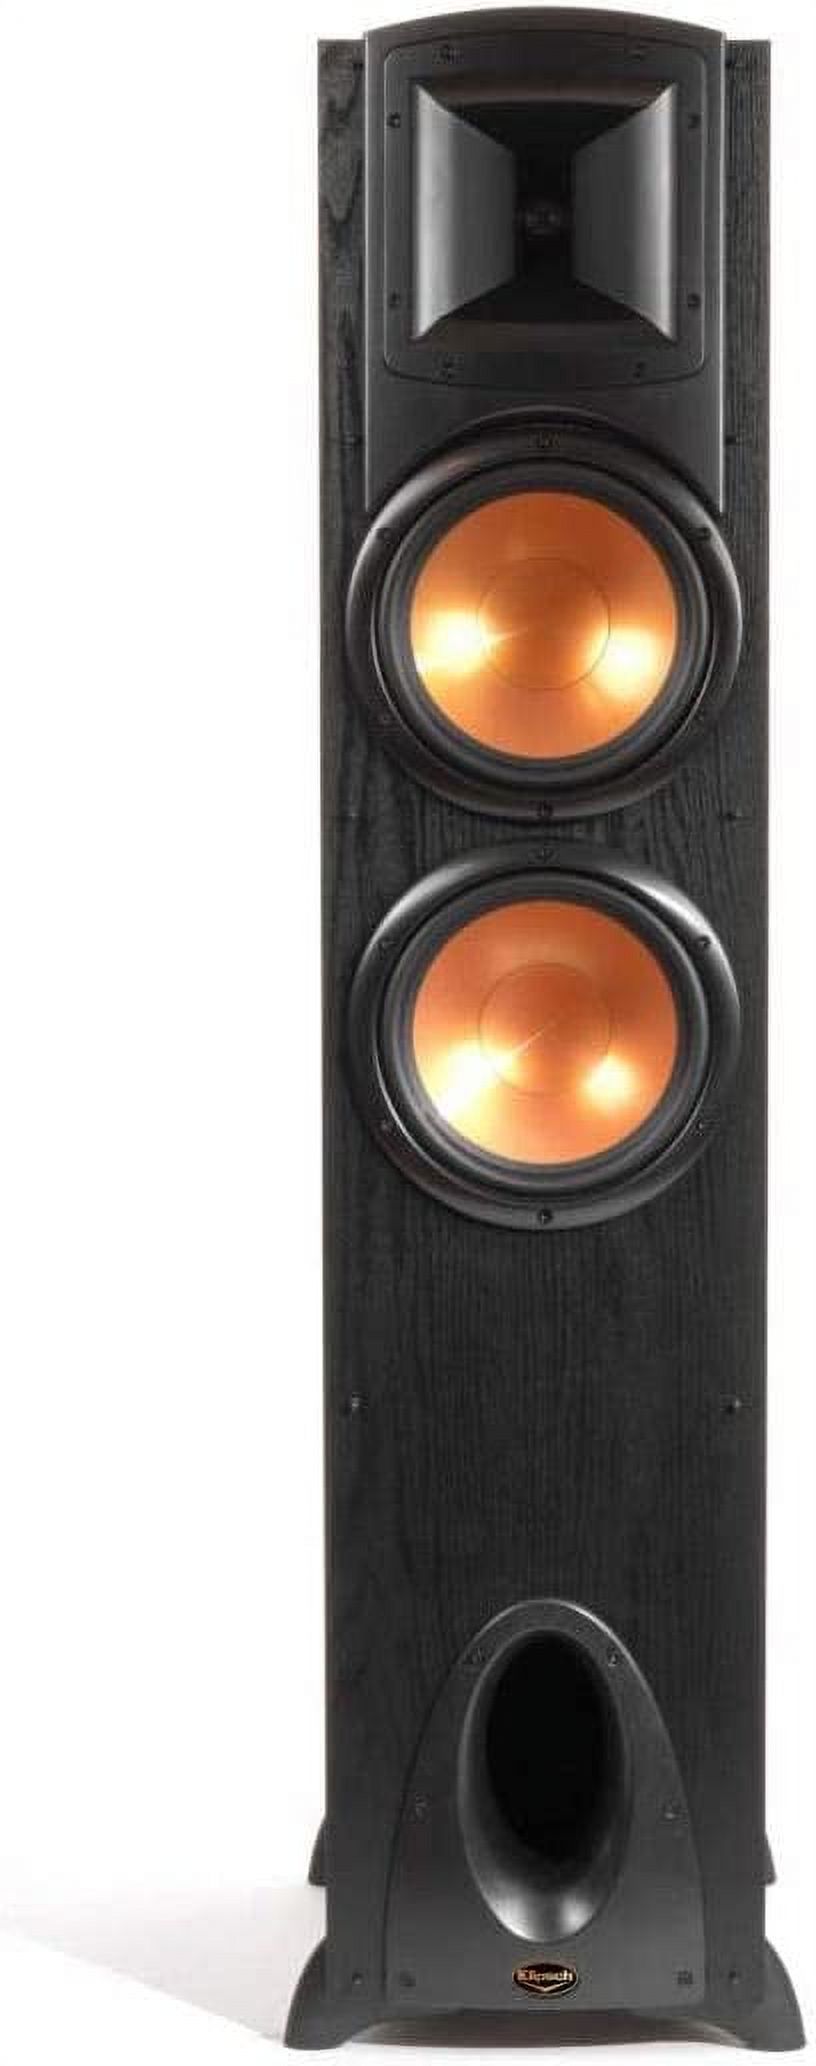 Klipsch Synergy Black Label F-300 Floorstanding Speaker with Dual 8" Woofers, Pair - image 5 of 5